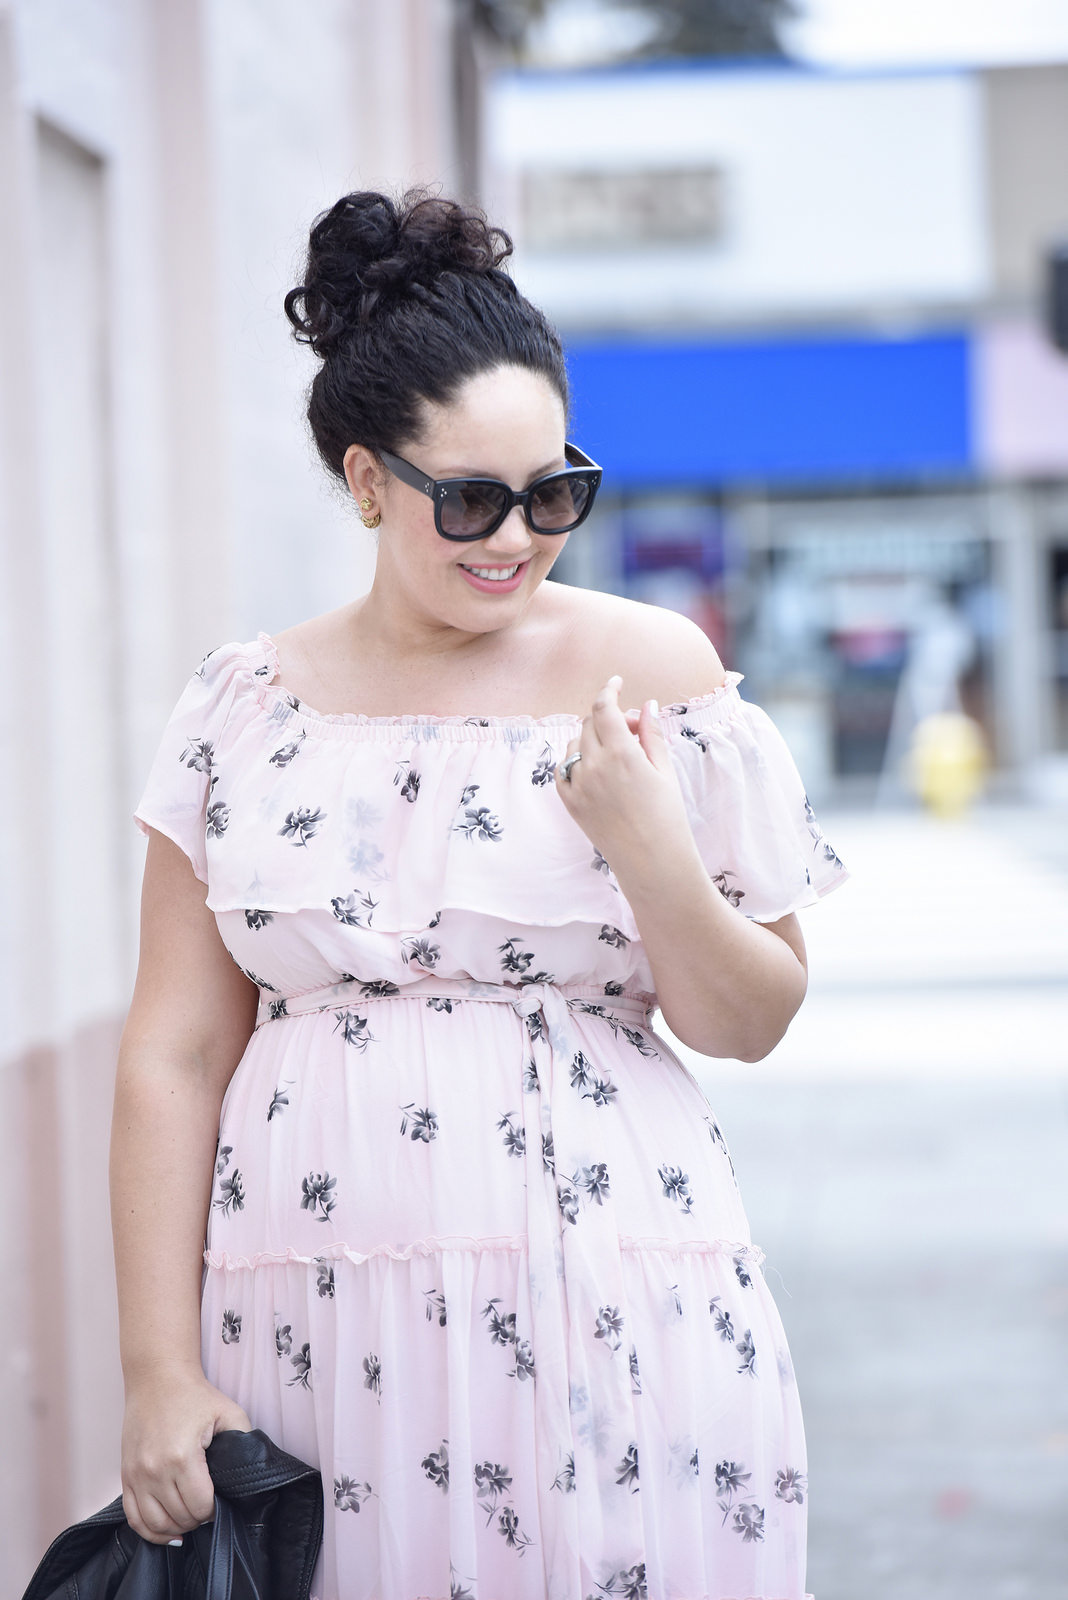 An Easy Way To Make A Floral Dress More Interesting Via @GirlWithCurves